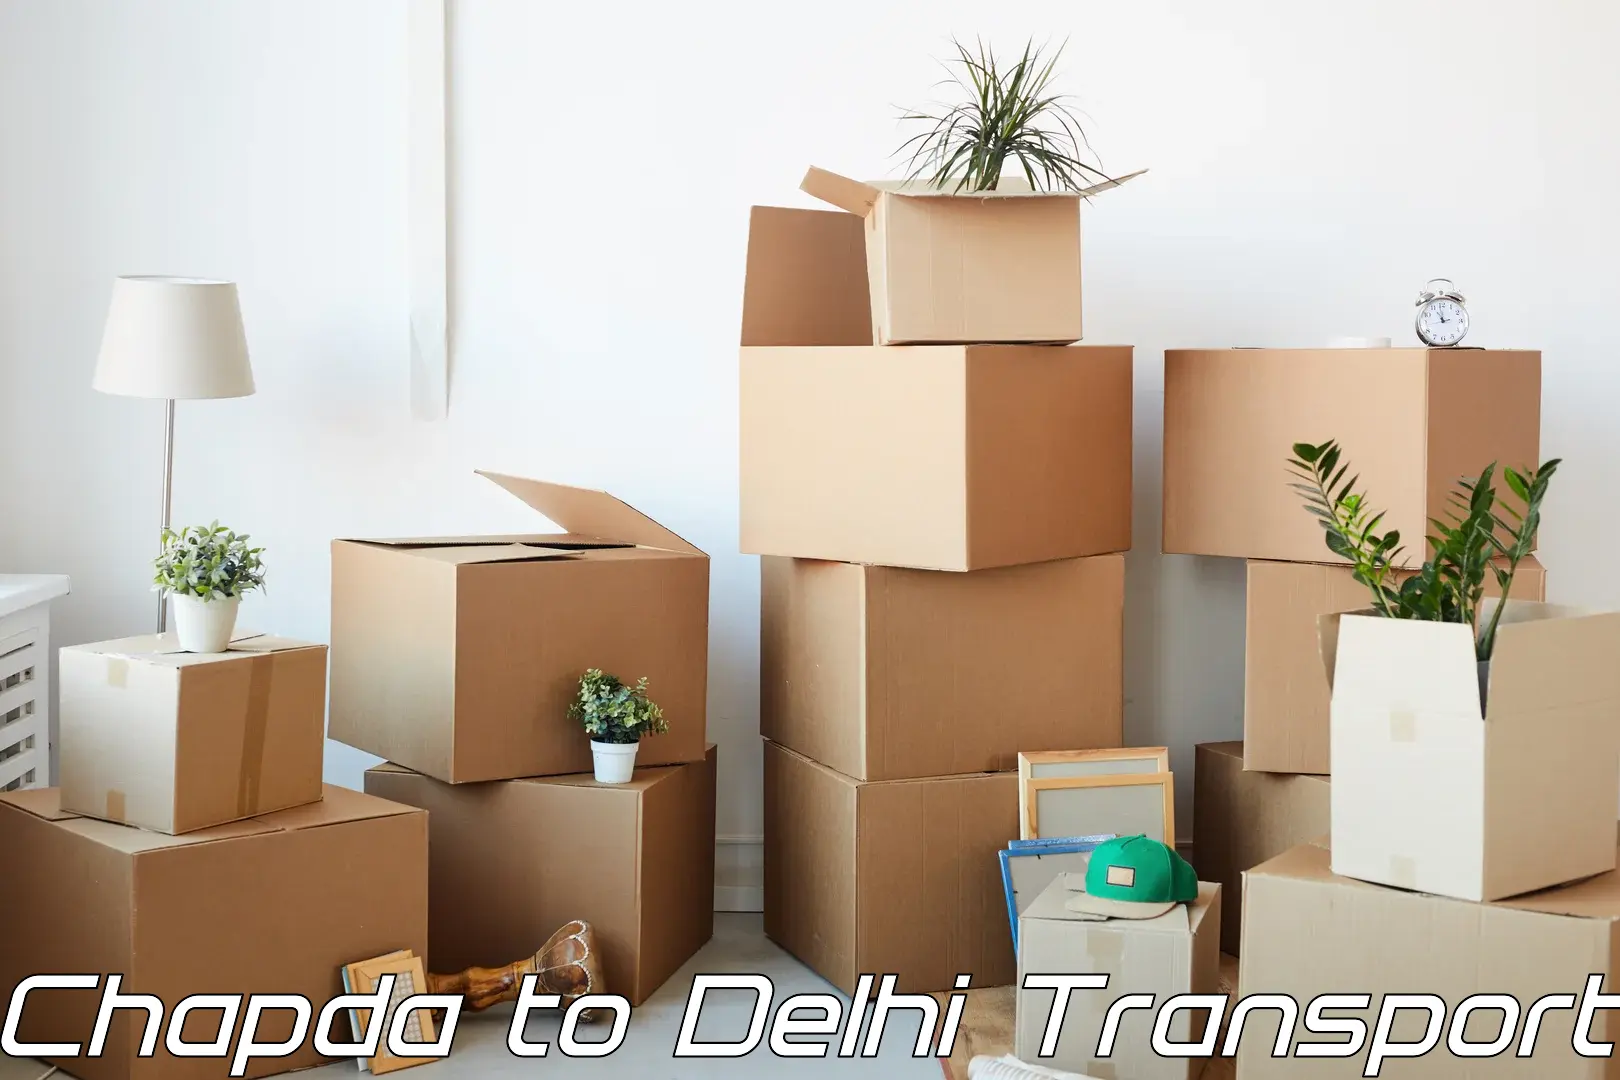 Goods delivery service Chapda to East Delhi